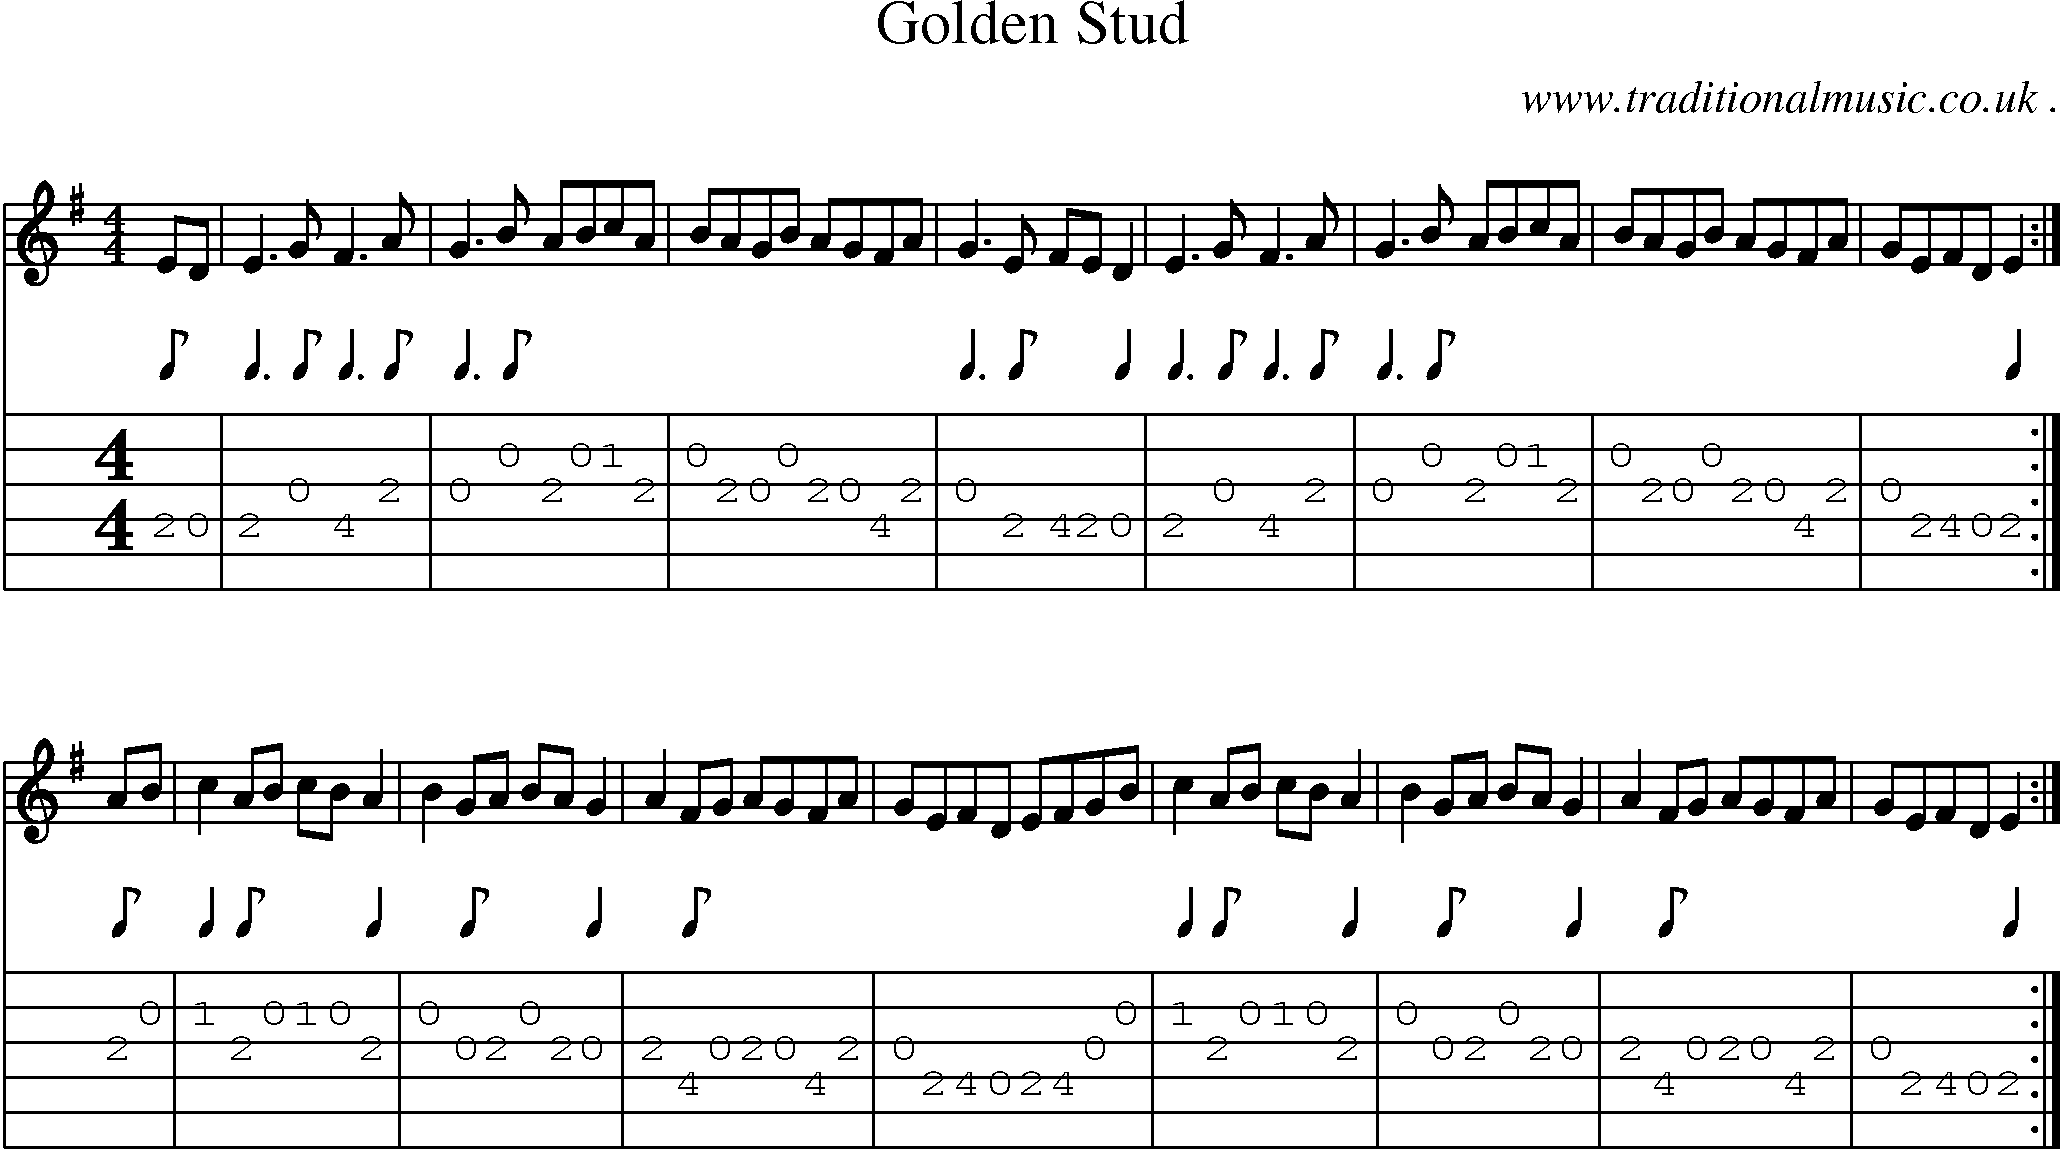 Sheet-Music and Guitar Tabs for Golden Stud